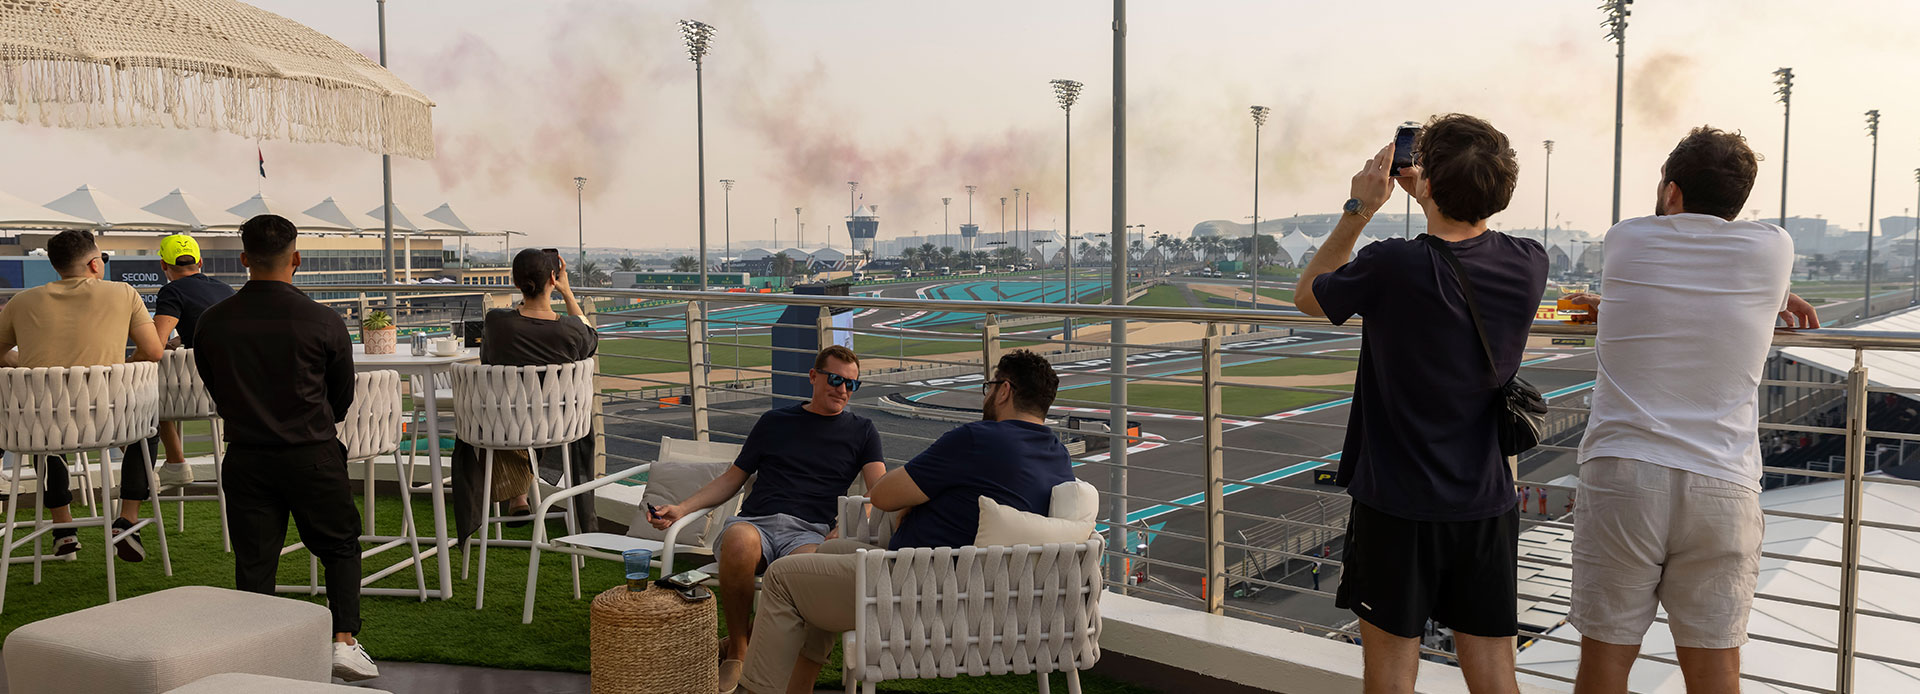 Guests watching the sunset from Shams Suite's terrace during the Abu Dhabi Grand Prix at Yas Marina Circuit.